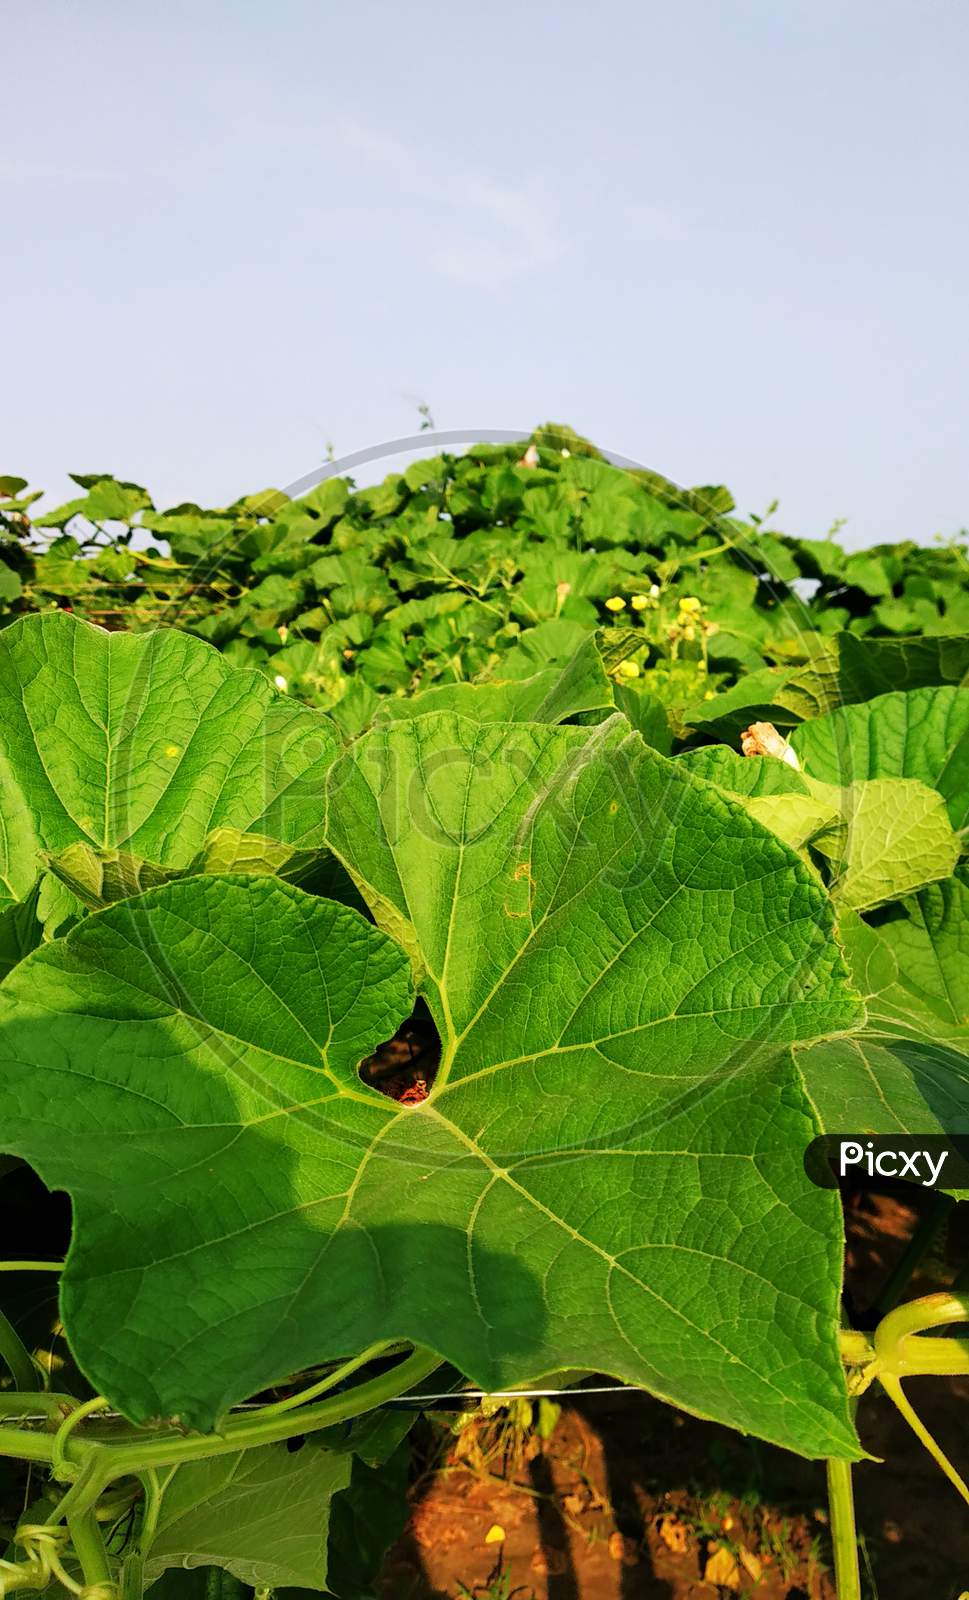 It is a gourd plant.  And this is his leaves.  Its color is green.  The sky has a view of the farm in the background.